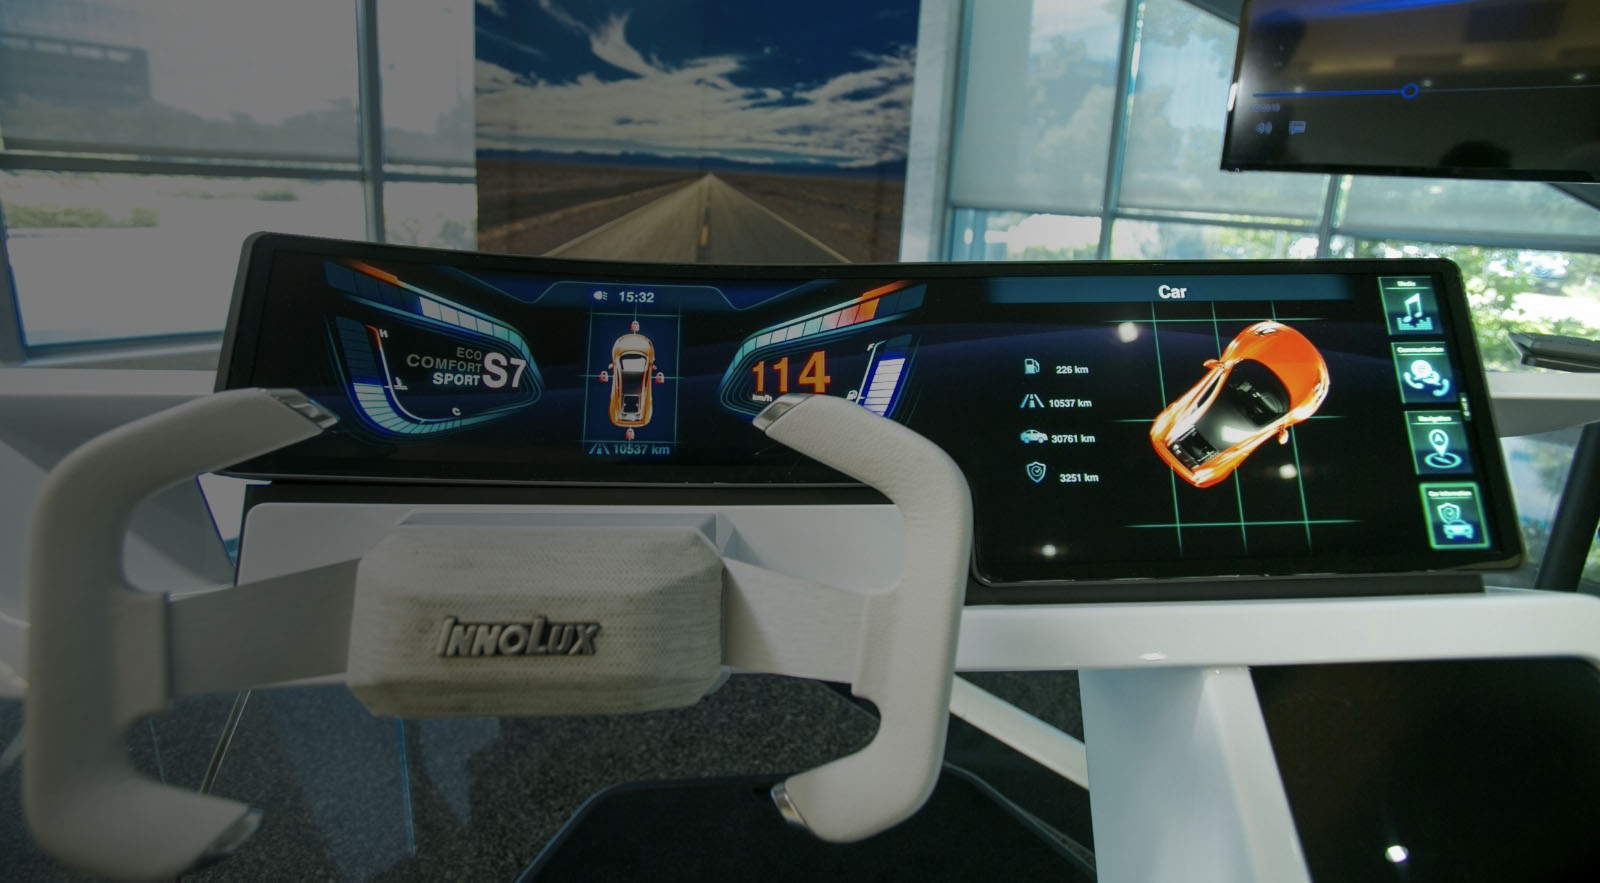 Innolux Automotive and Avionics continues to invest in next generation automotive user experiences